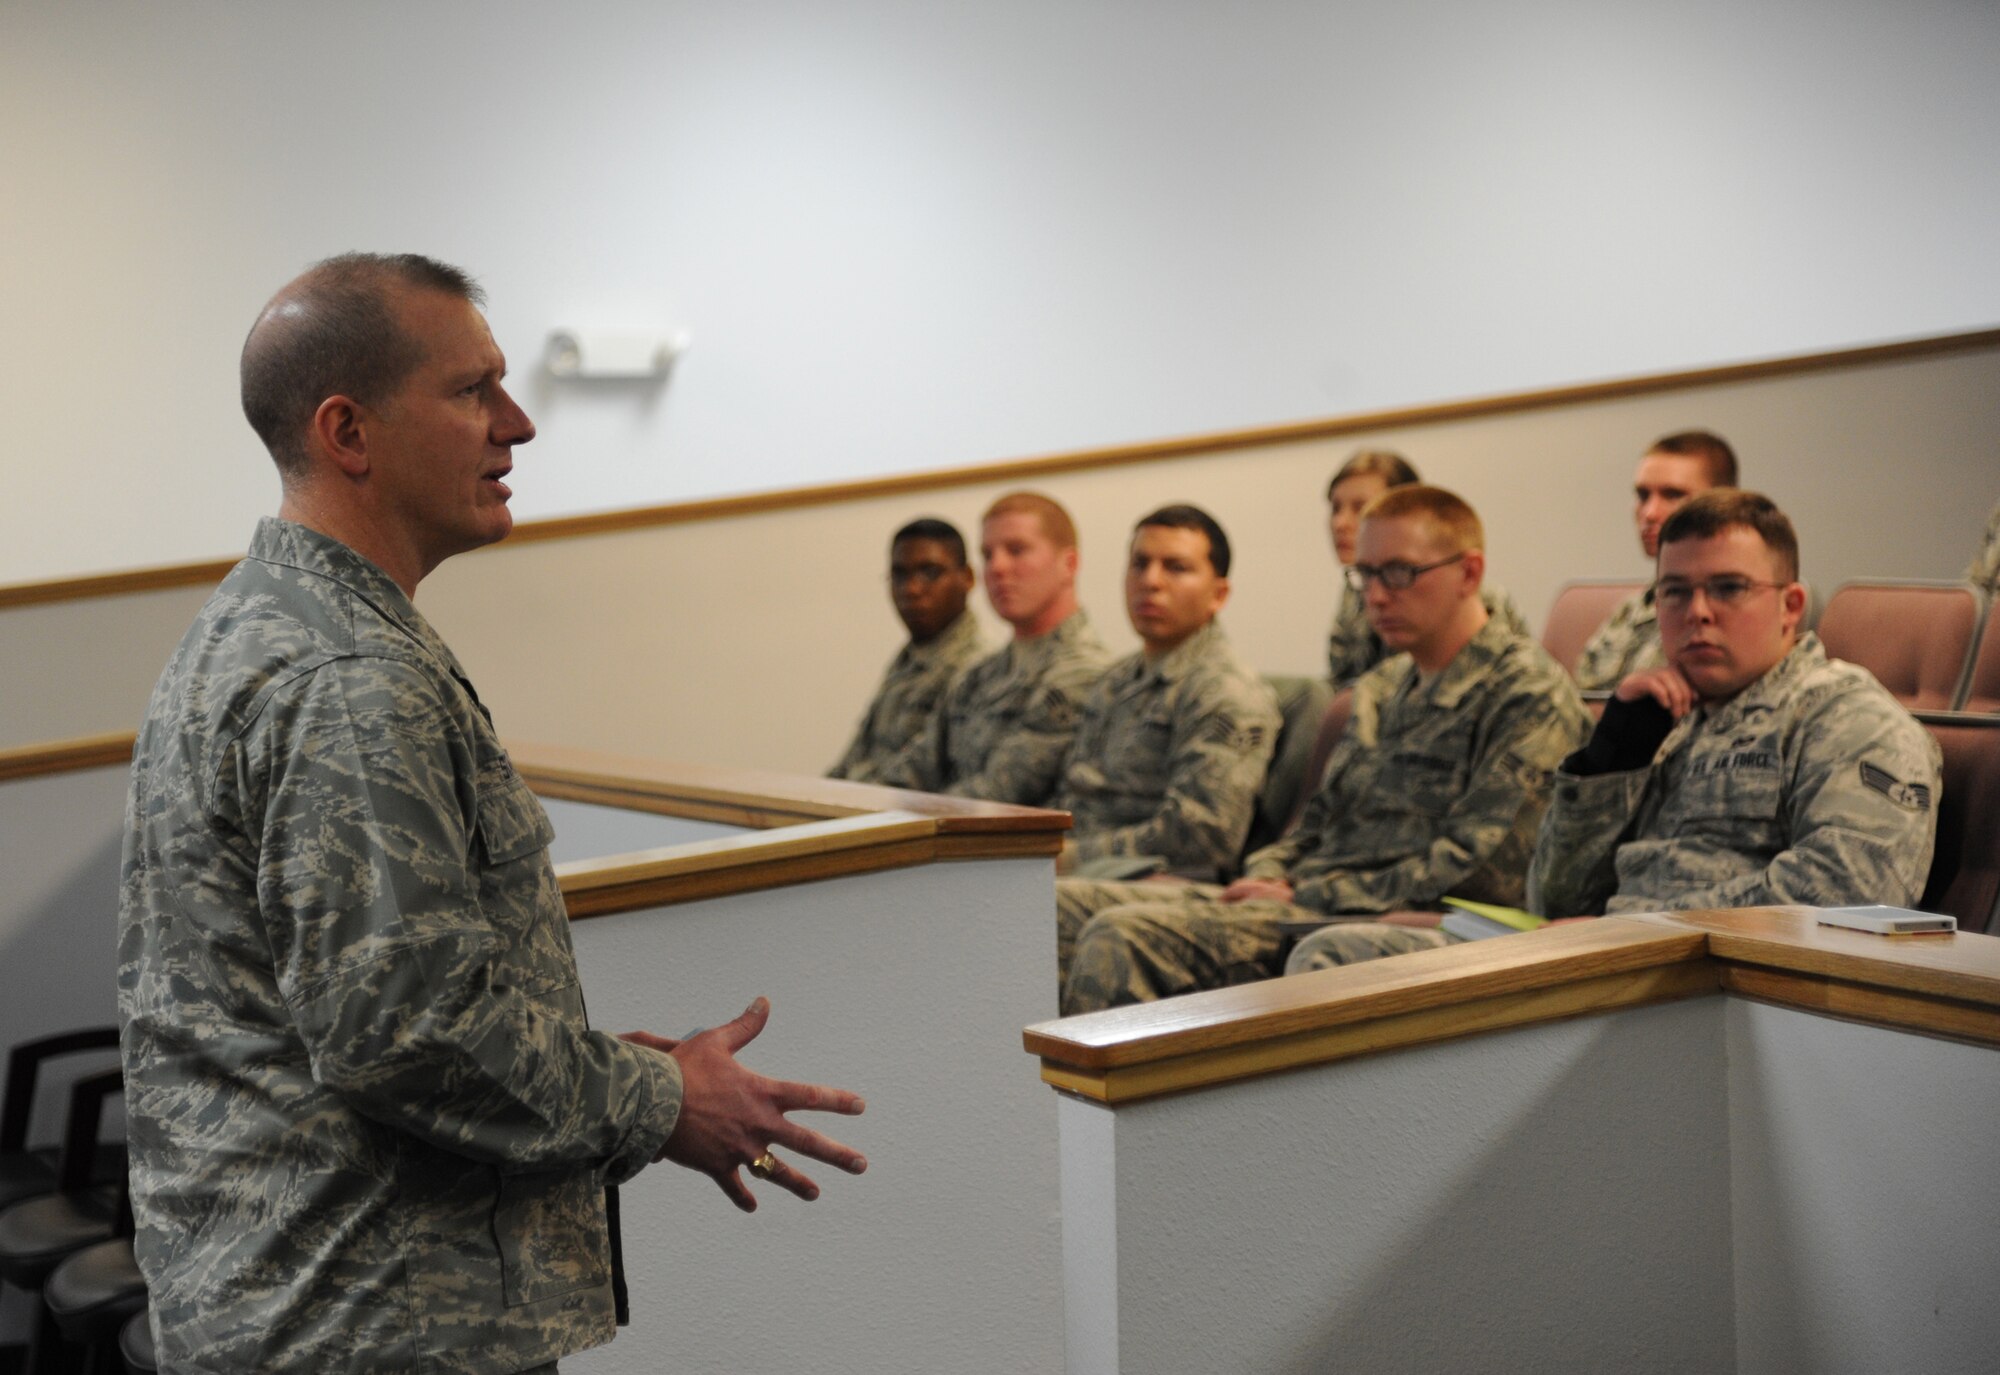 Col. Robert Stanley, 341st Missile Wing commander, discusses leadership during the "Continue to Rise: Arise as a Leader" Airman development seminar Feb. 12 in the conference room in Bldg. 3080. Stanley was one of several Airmen to speak during the half-day seminar. (U.S. Air Force photo/Staff Sgt. R.J. Biermann) 